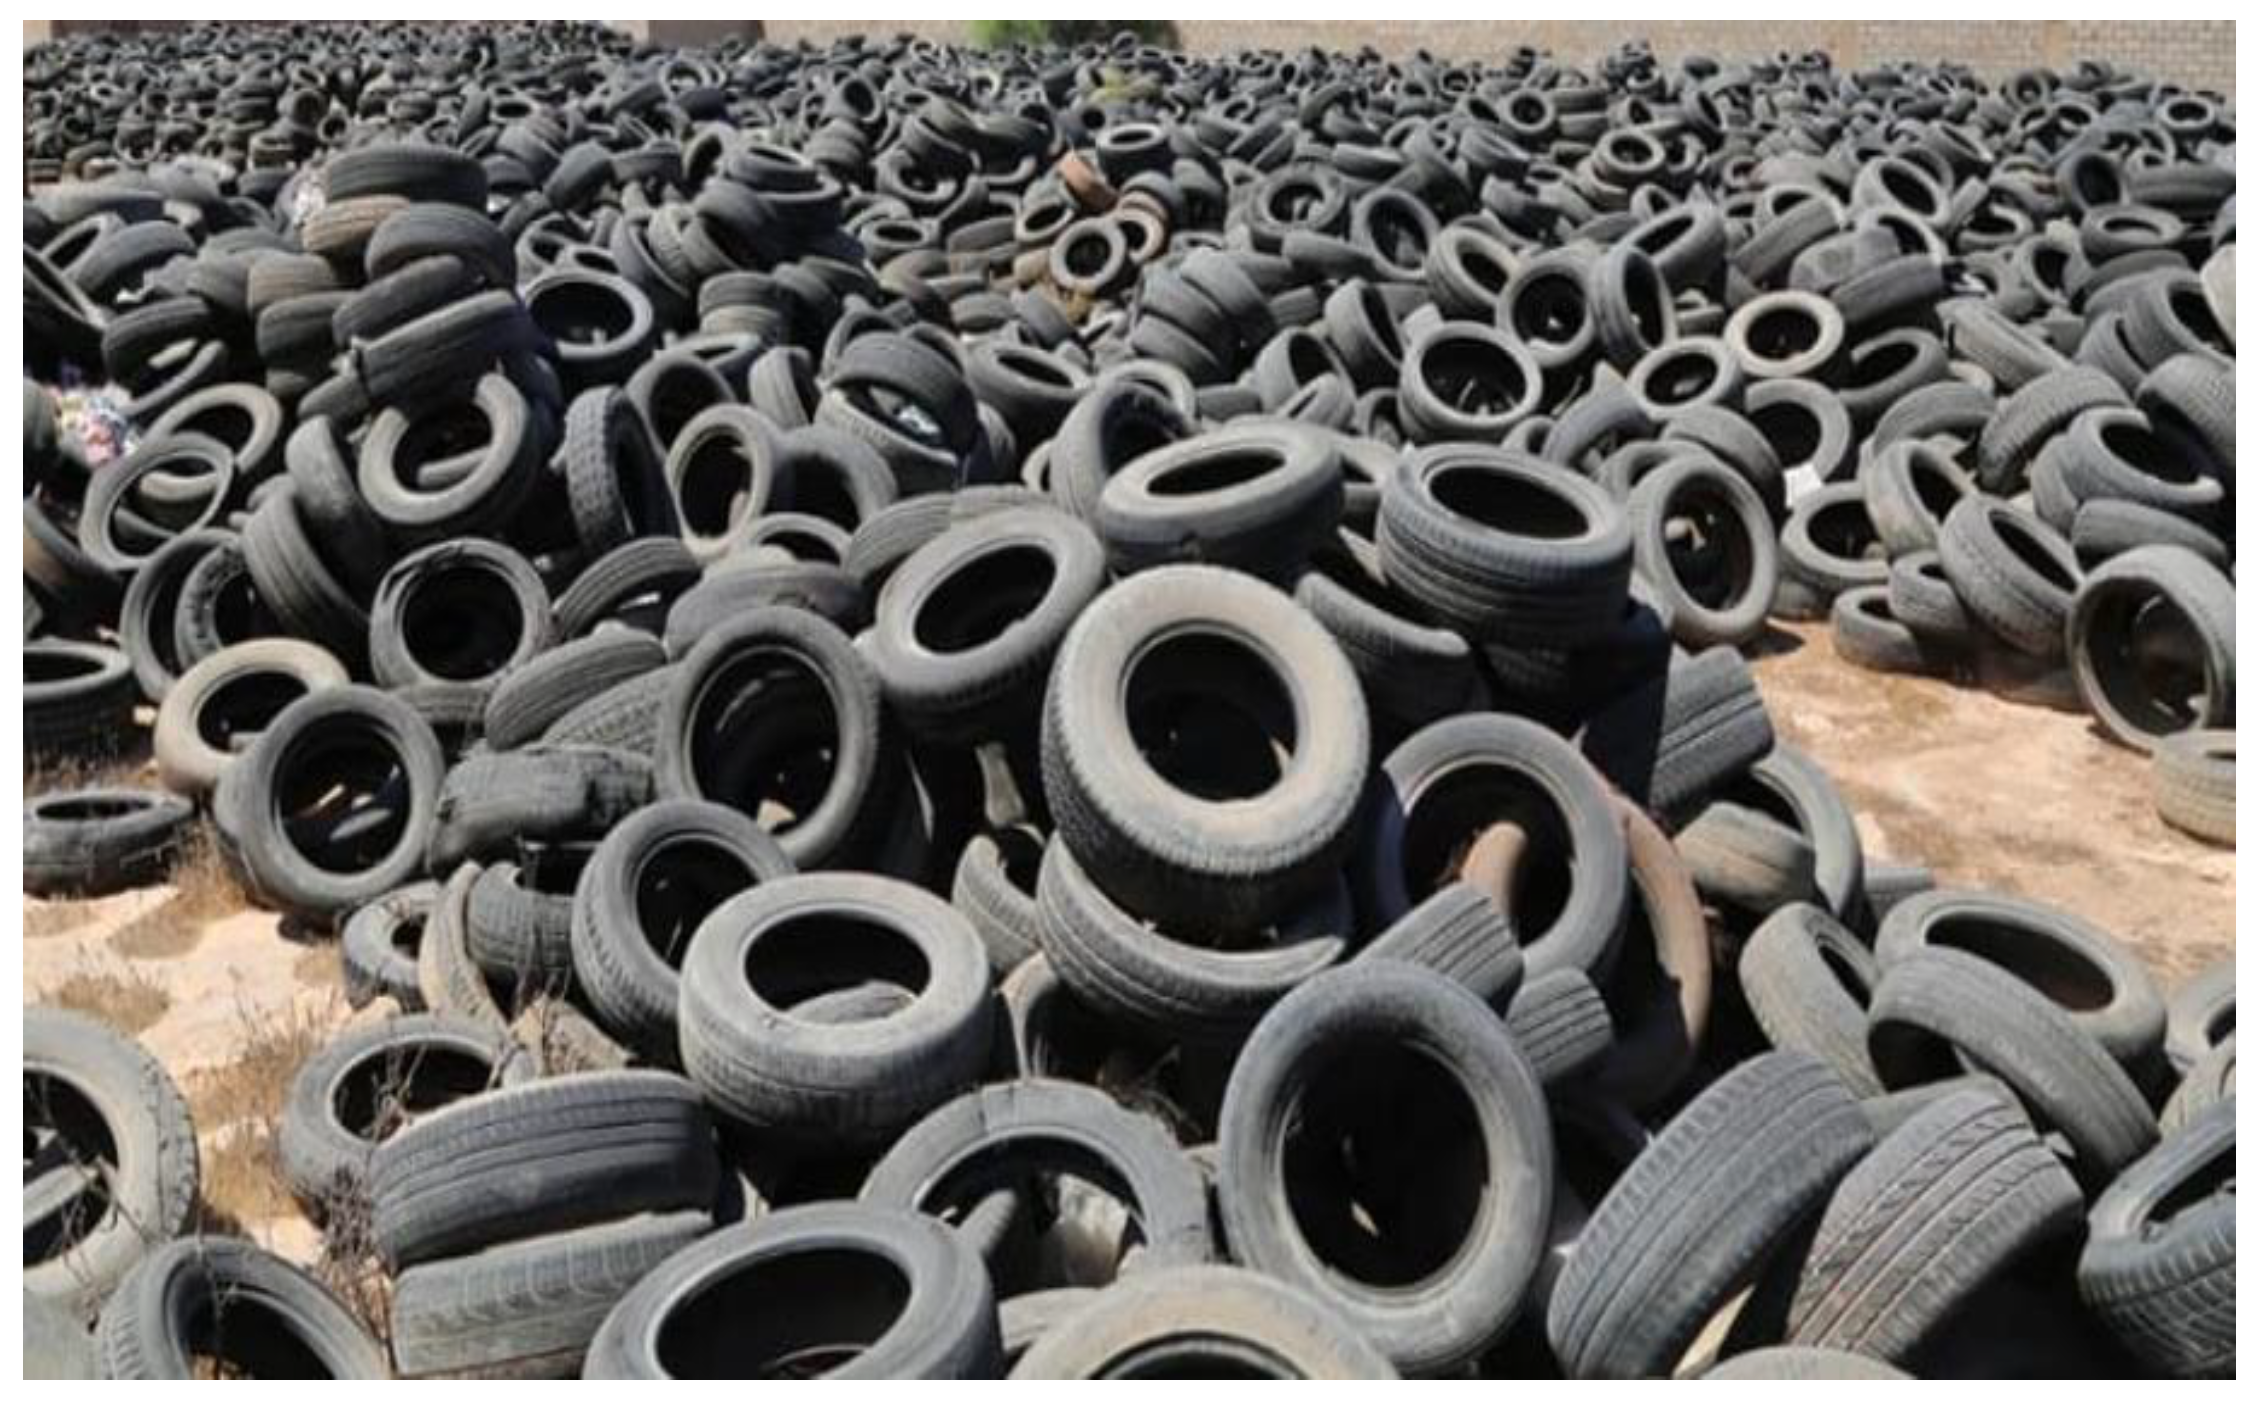 Sustainability | Free Full-Text | Recycling Tire Rubber in Asphalt